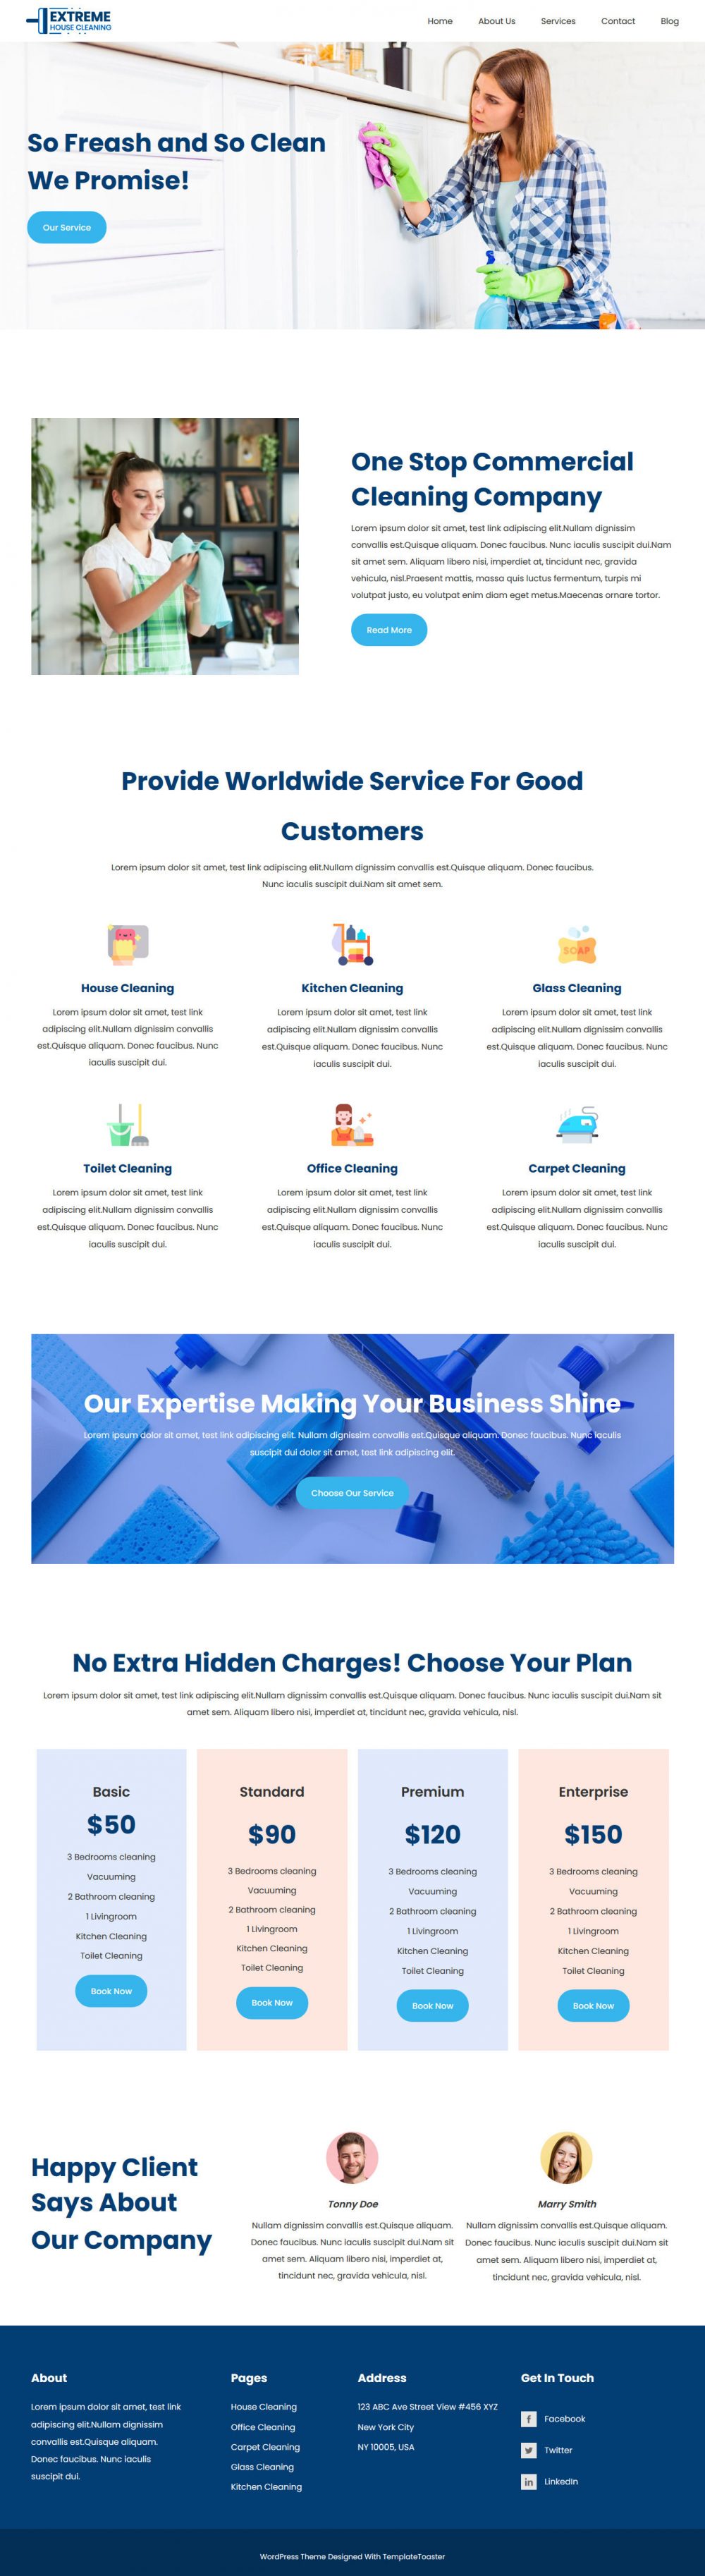 extreme house cleaning company joomla template